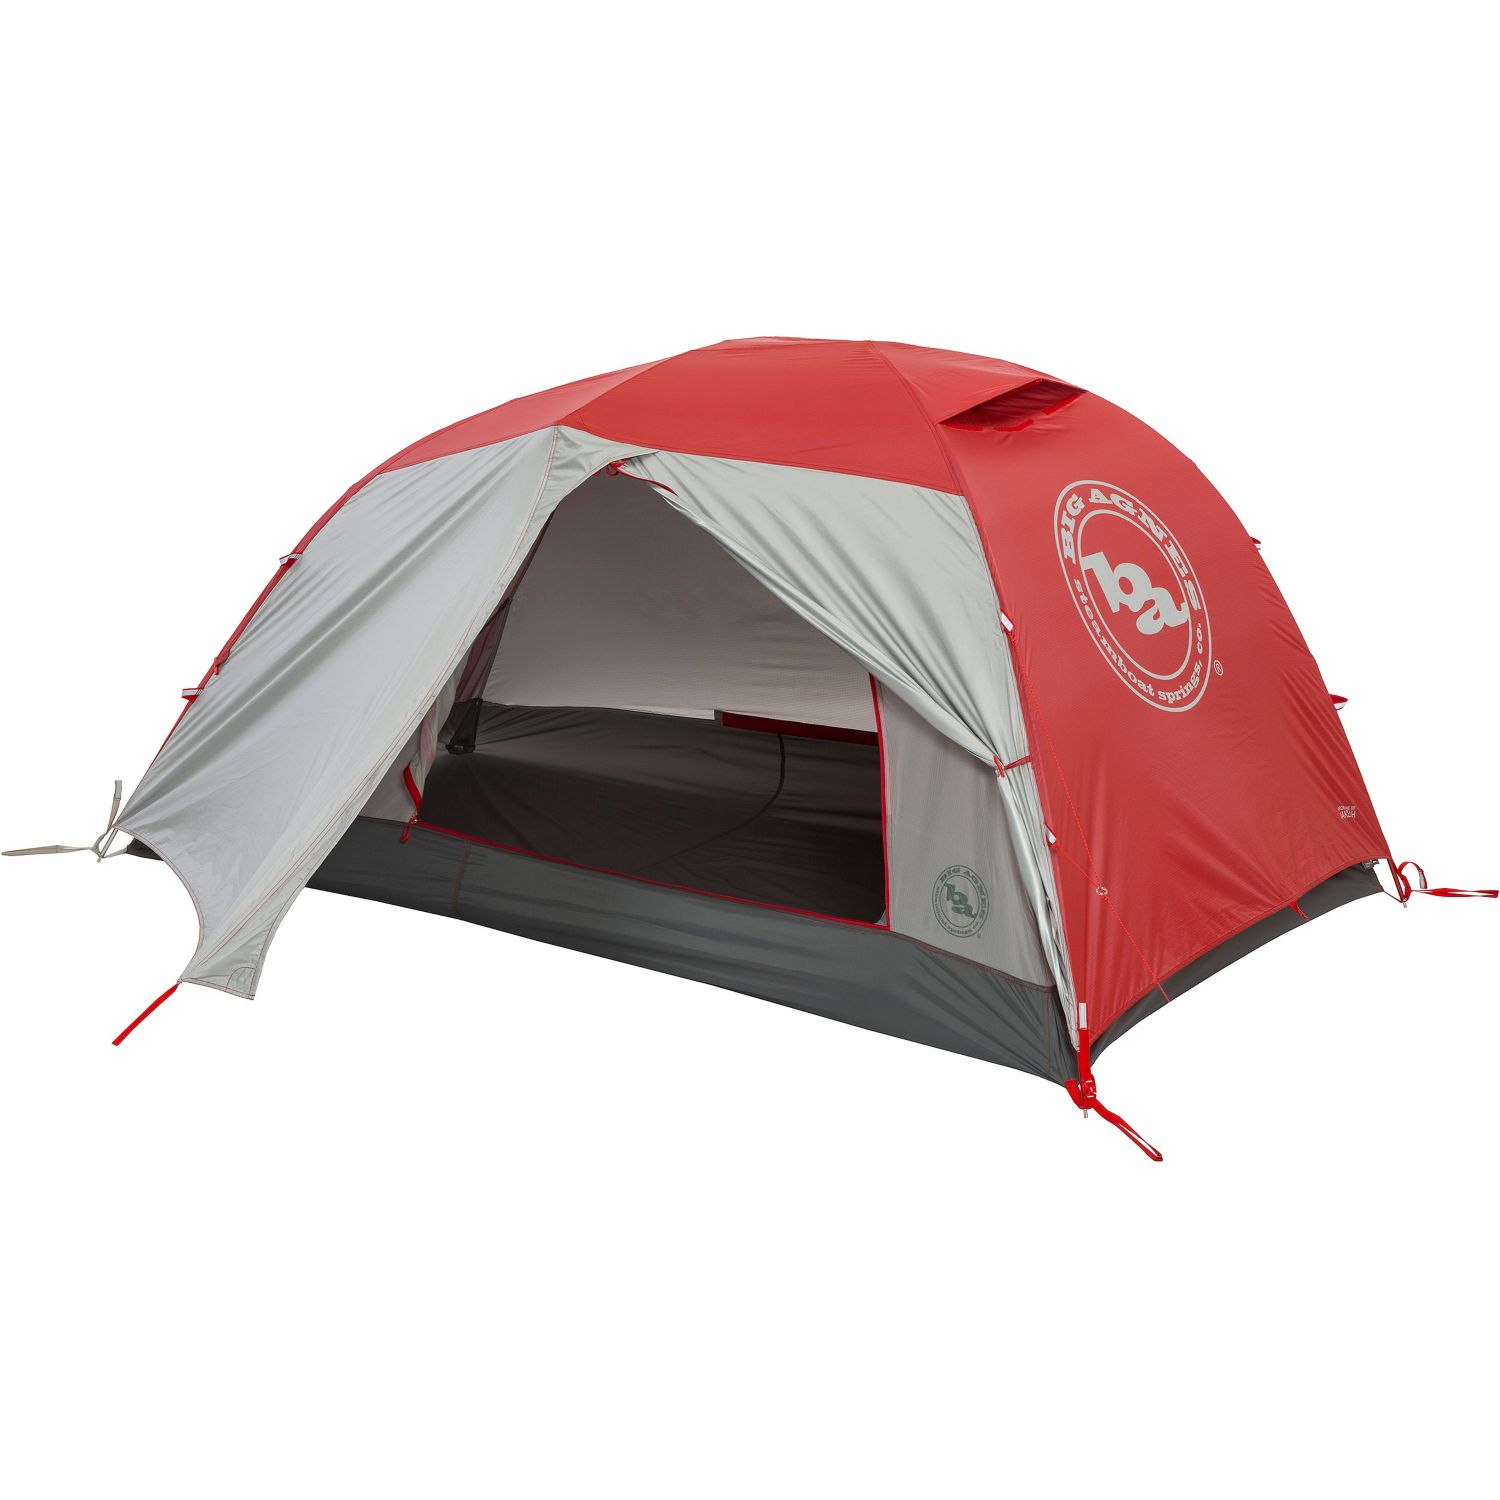 Copper Spur HV3 Expedition Red